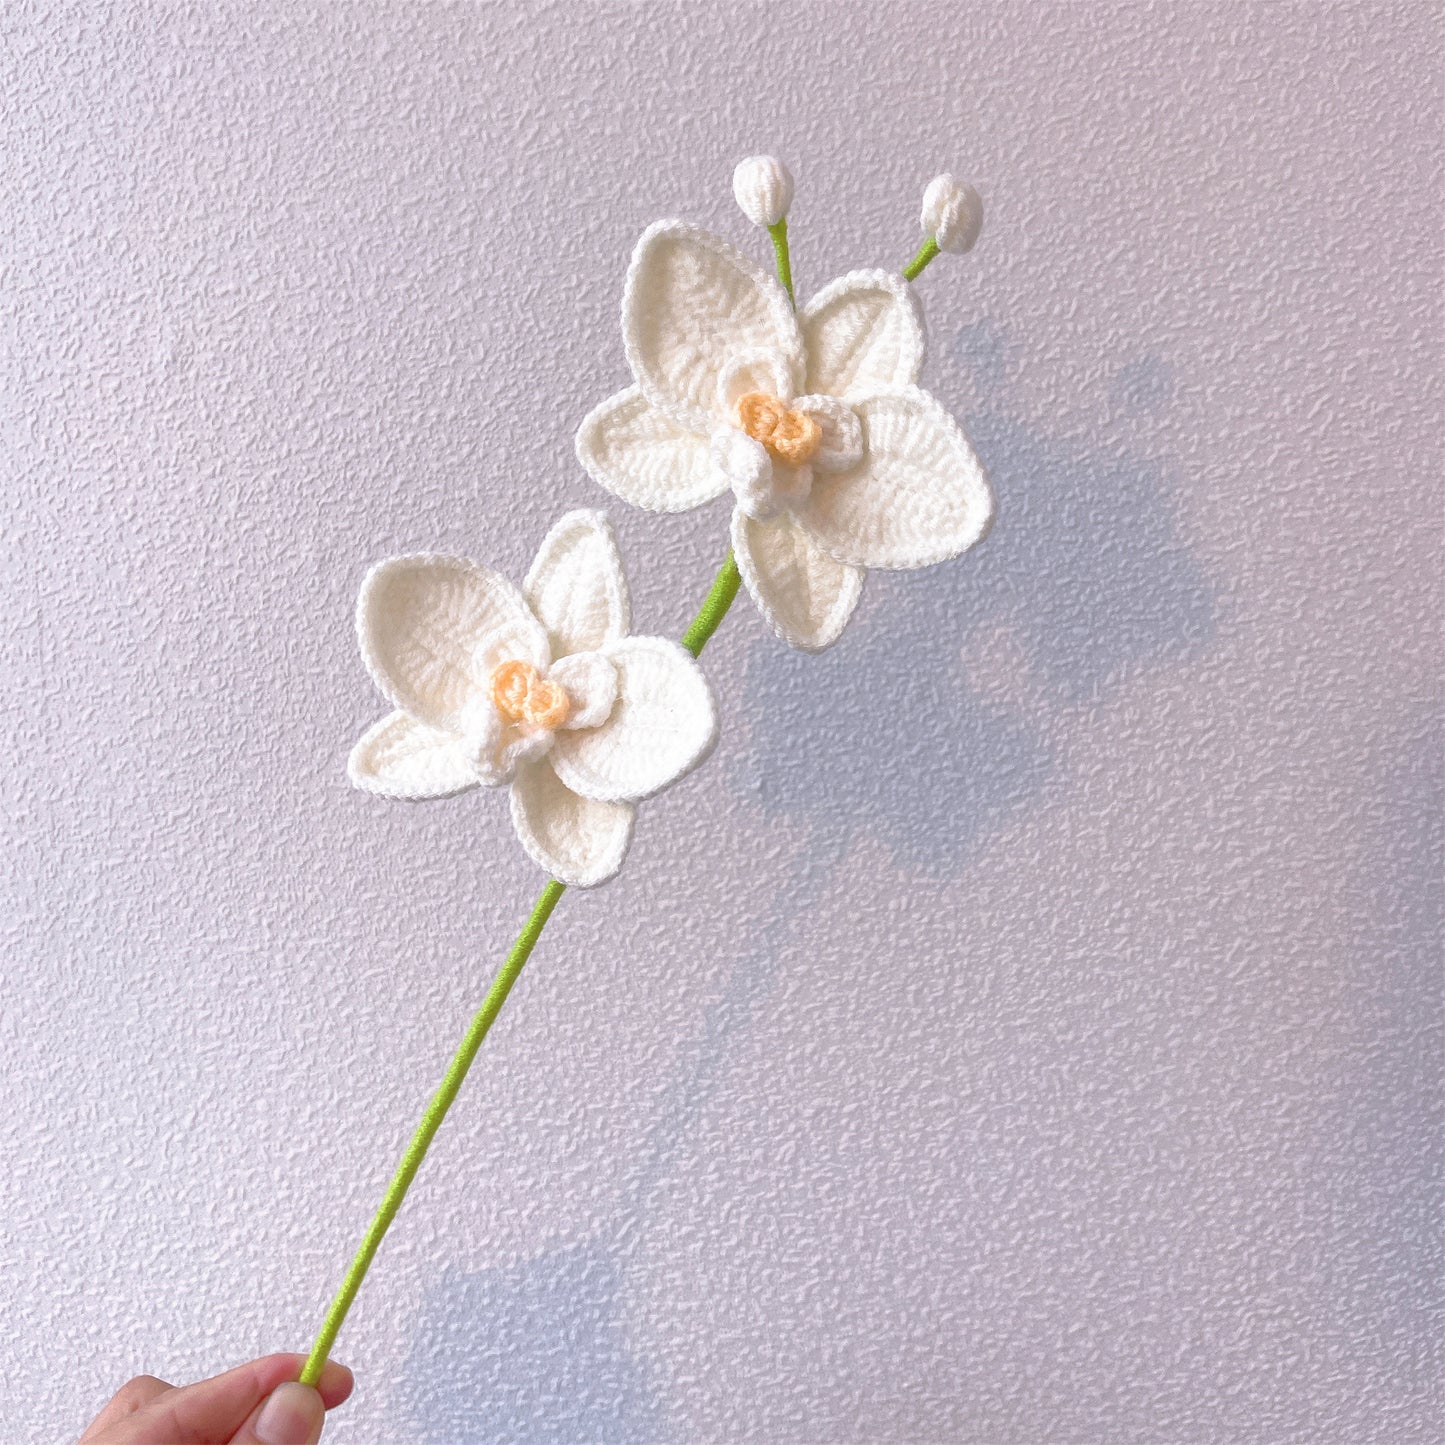 Handmade Phalaenopsis Orchid Stake for Home Decoration and Plant Support - Crochet Yarn Craft, Indoor Decor, Unique Gifts, Crochet Bouquet